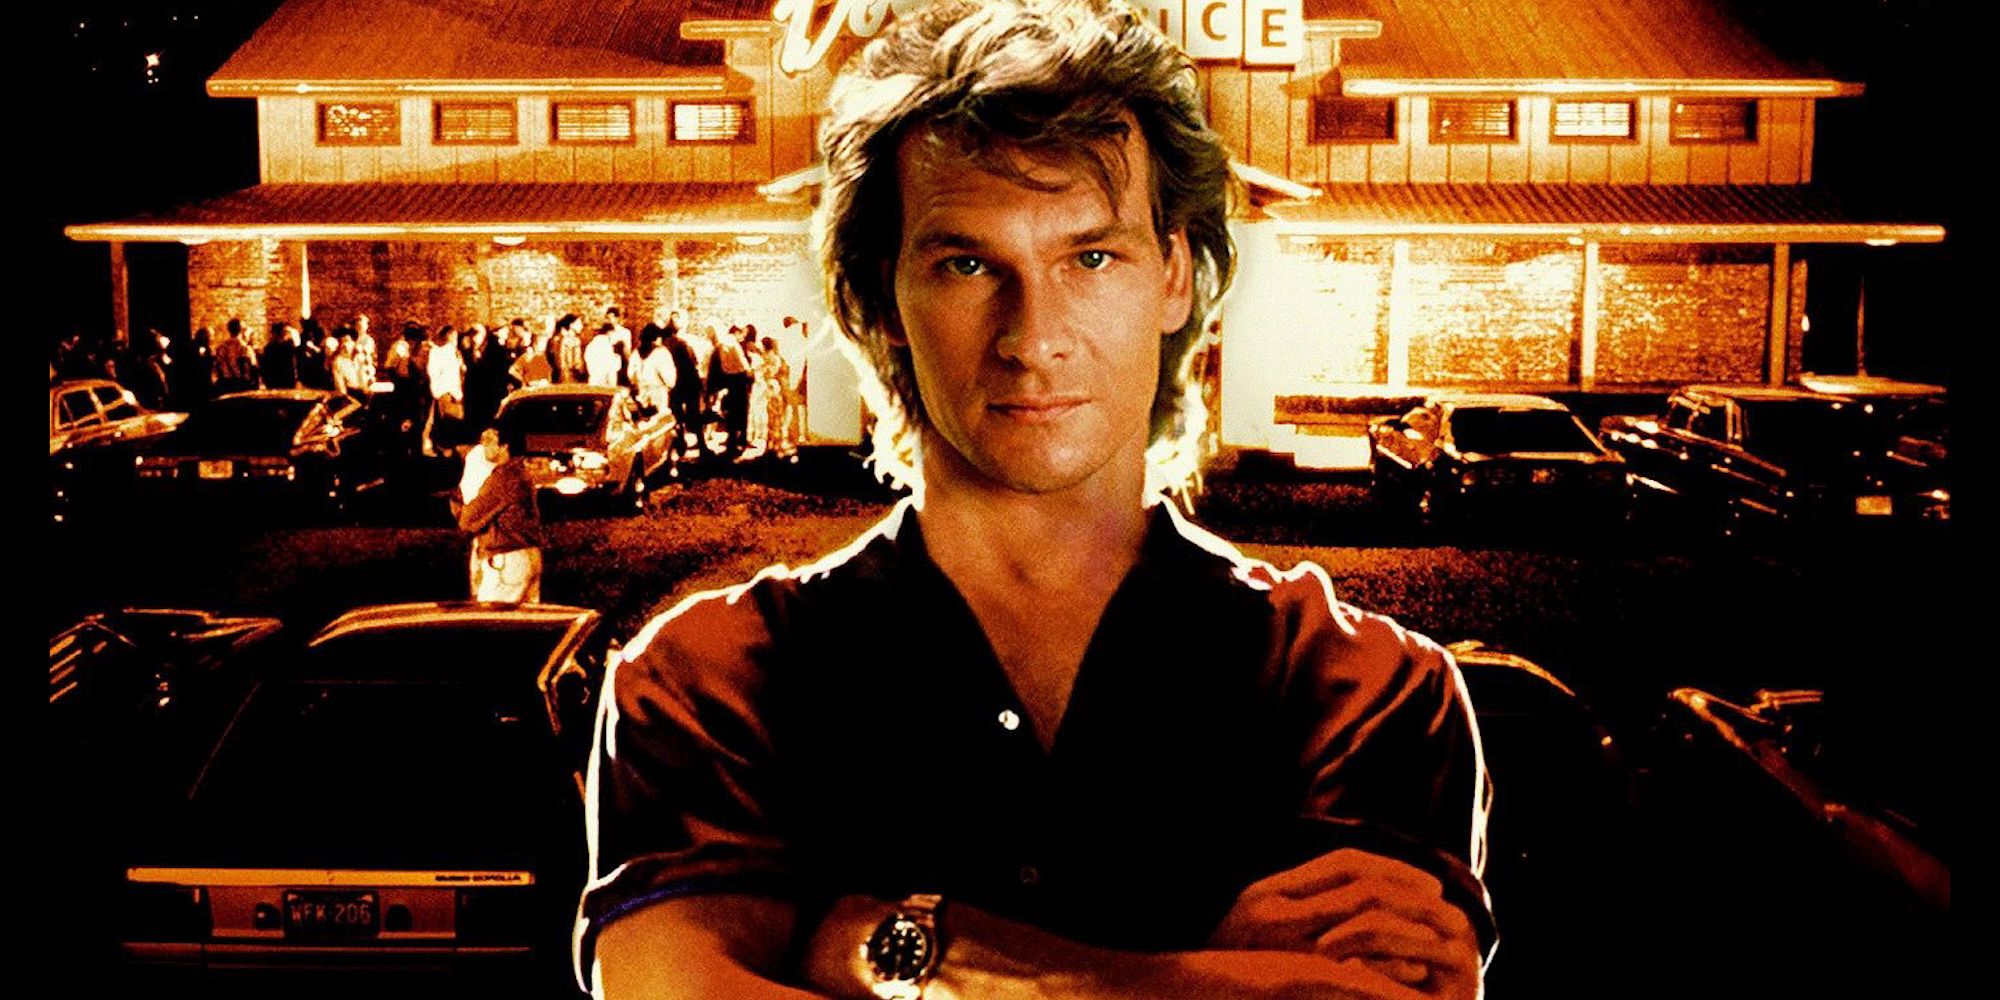 Patrick Swayze in 1989's Road House